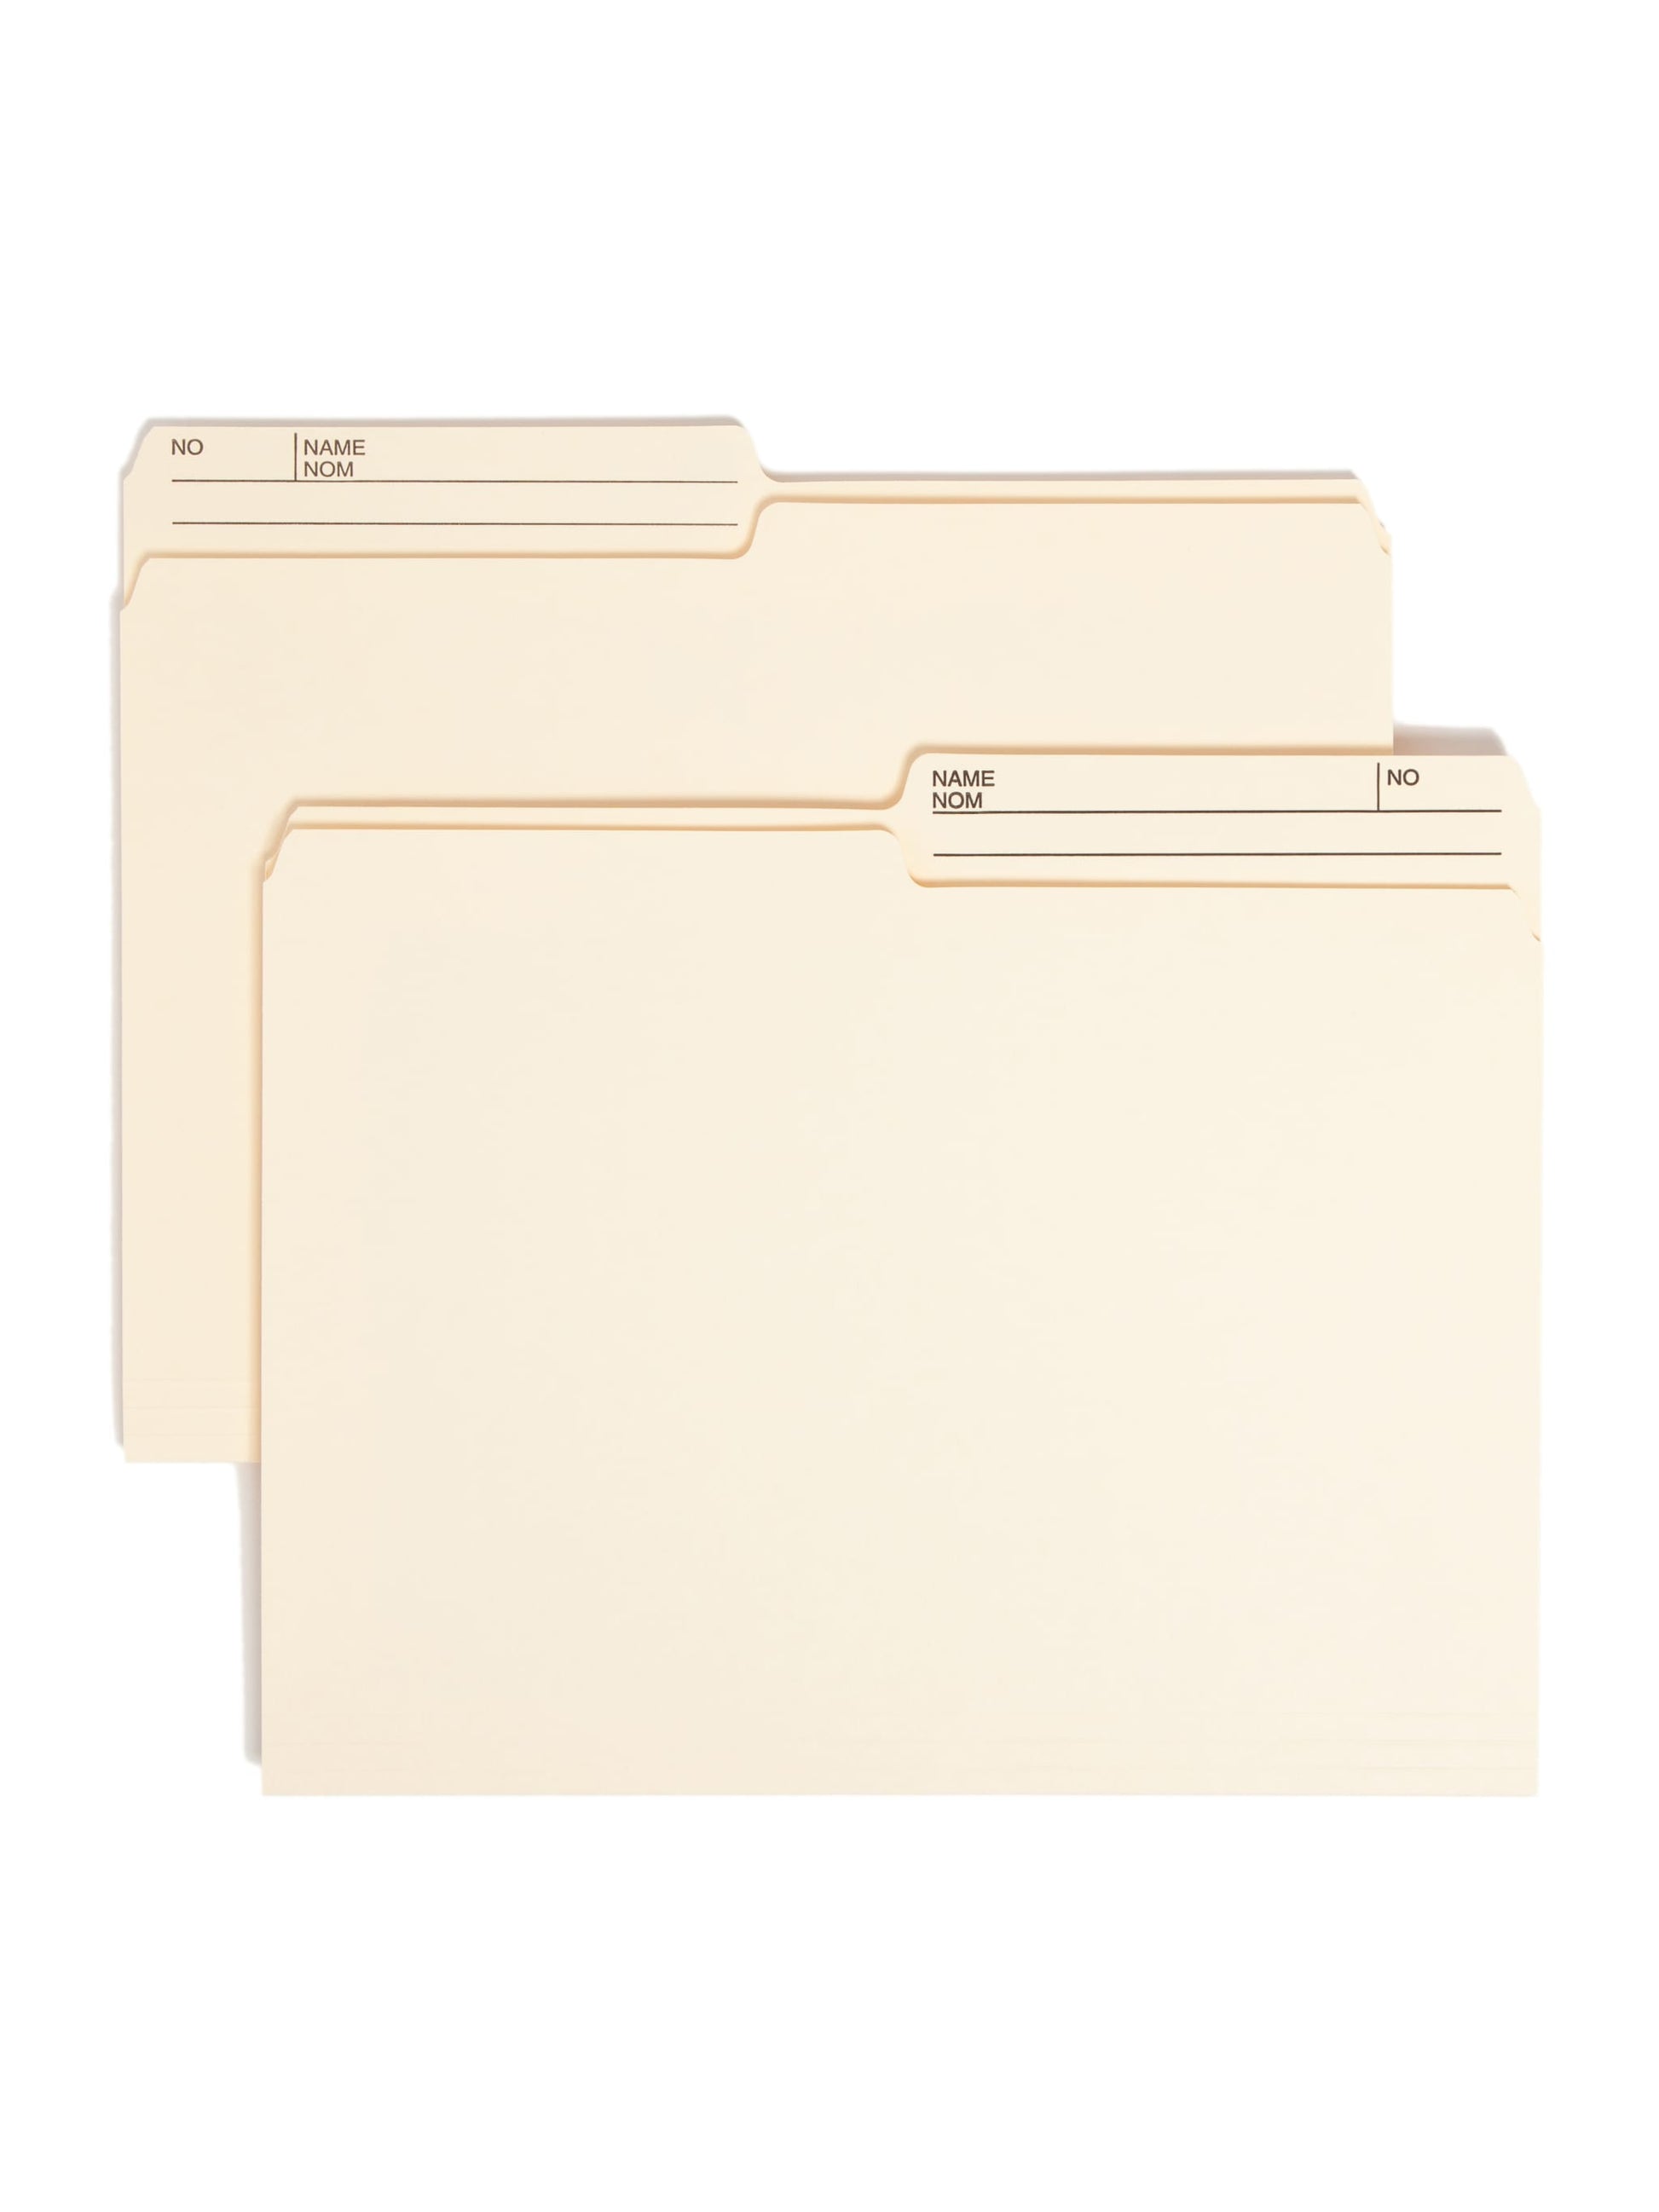 Heavyweight Reversible Printed Tab File Folders, Manila Color, Letter Size, 086486104456